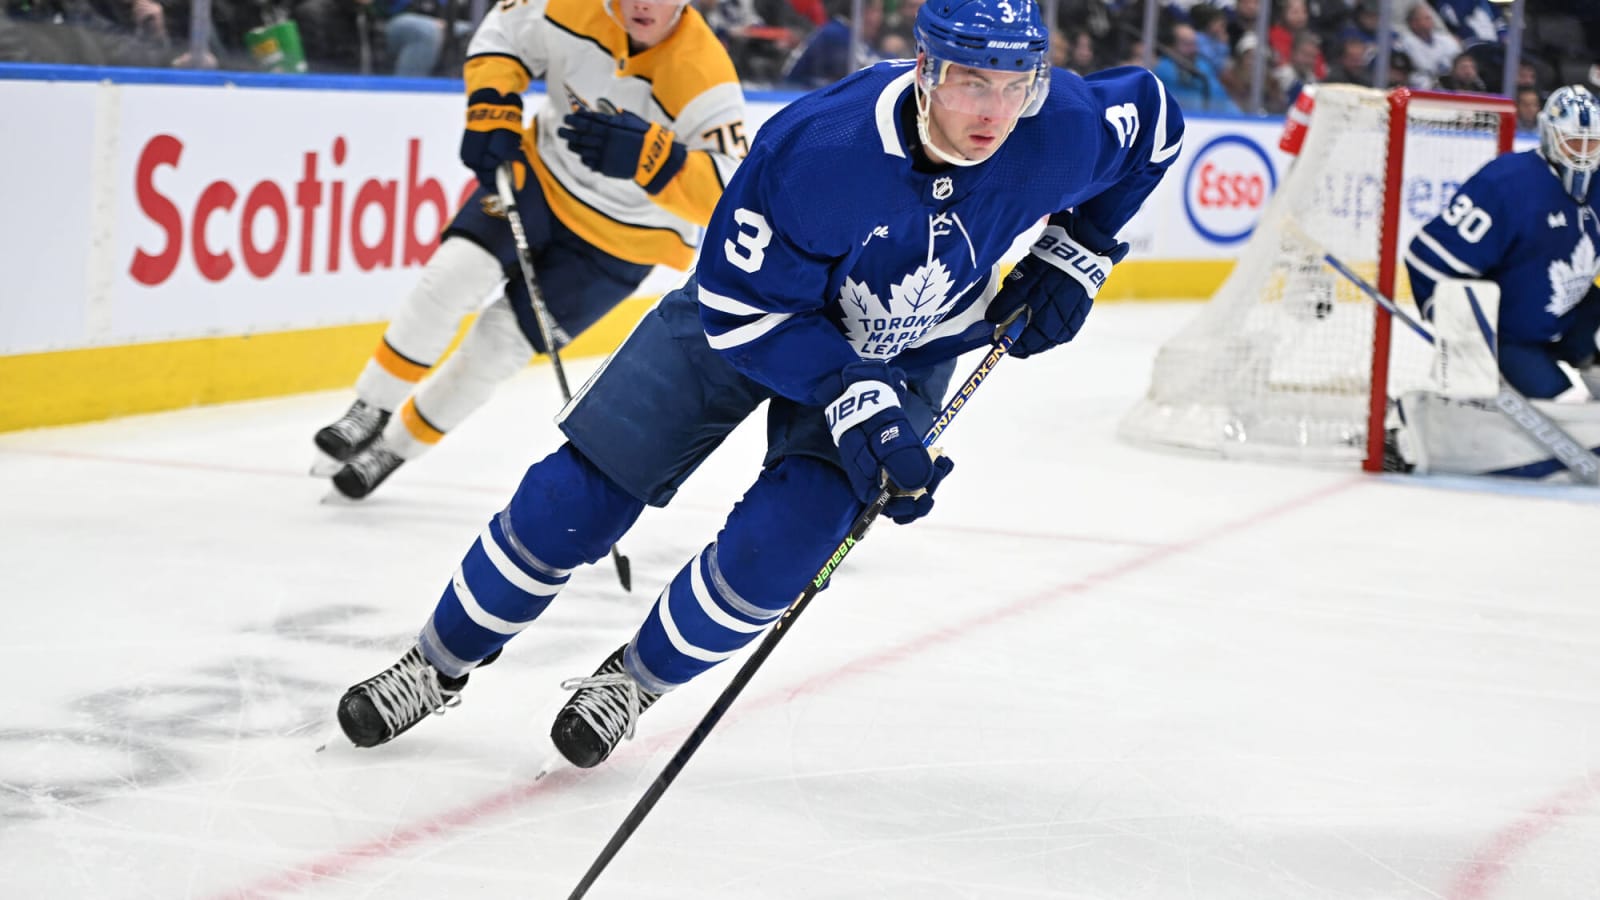 The Time For Maple Leafs To Trade D-Man Holl Is Now